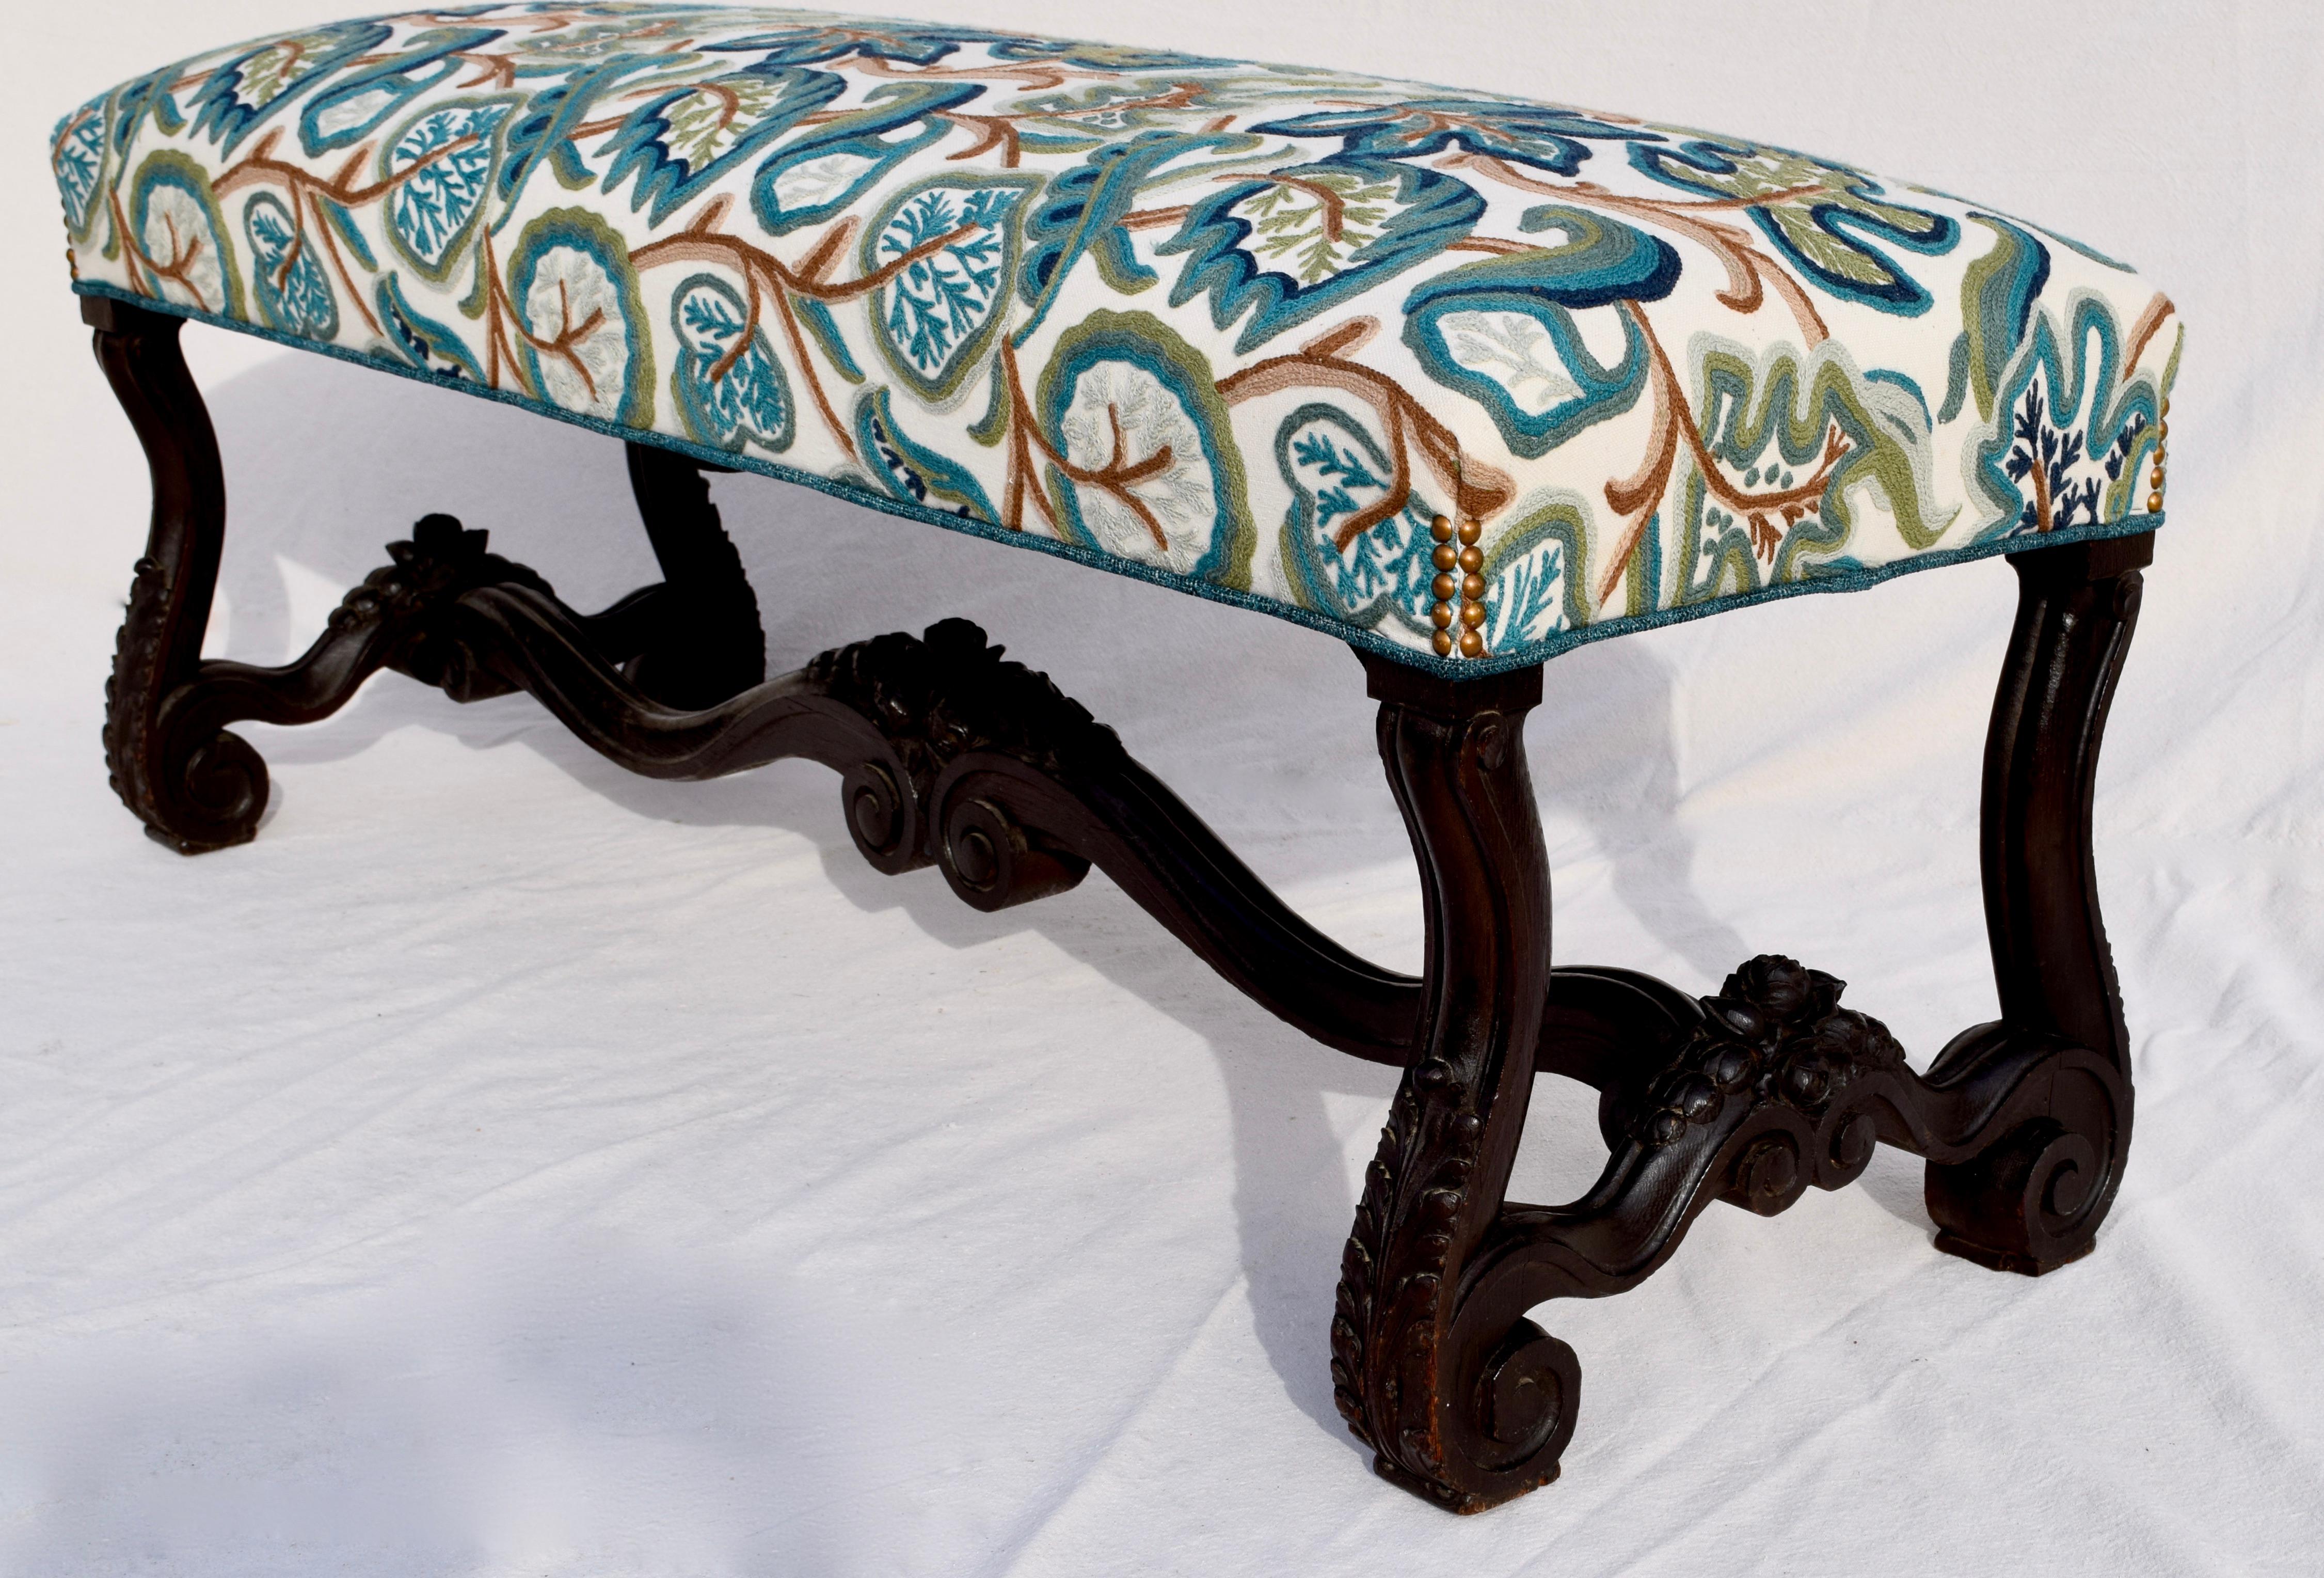 Mid-19th Century Antique American Empire Upholstered Scroll Form Bench 3